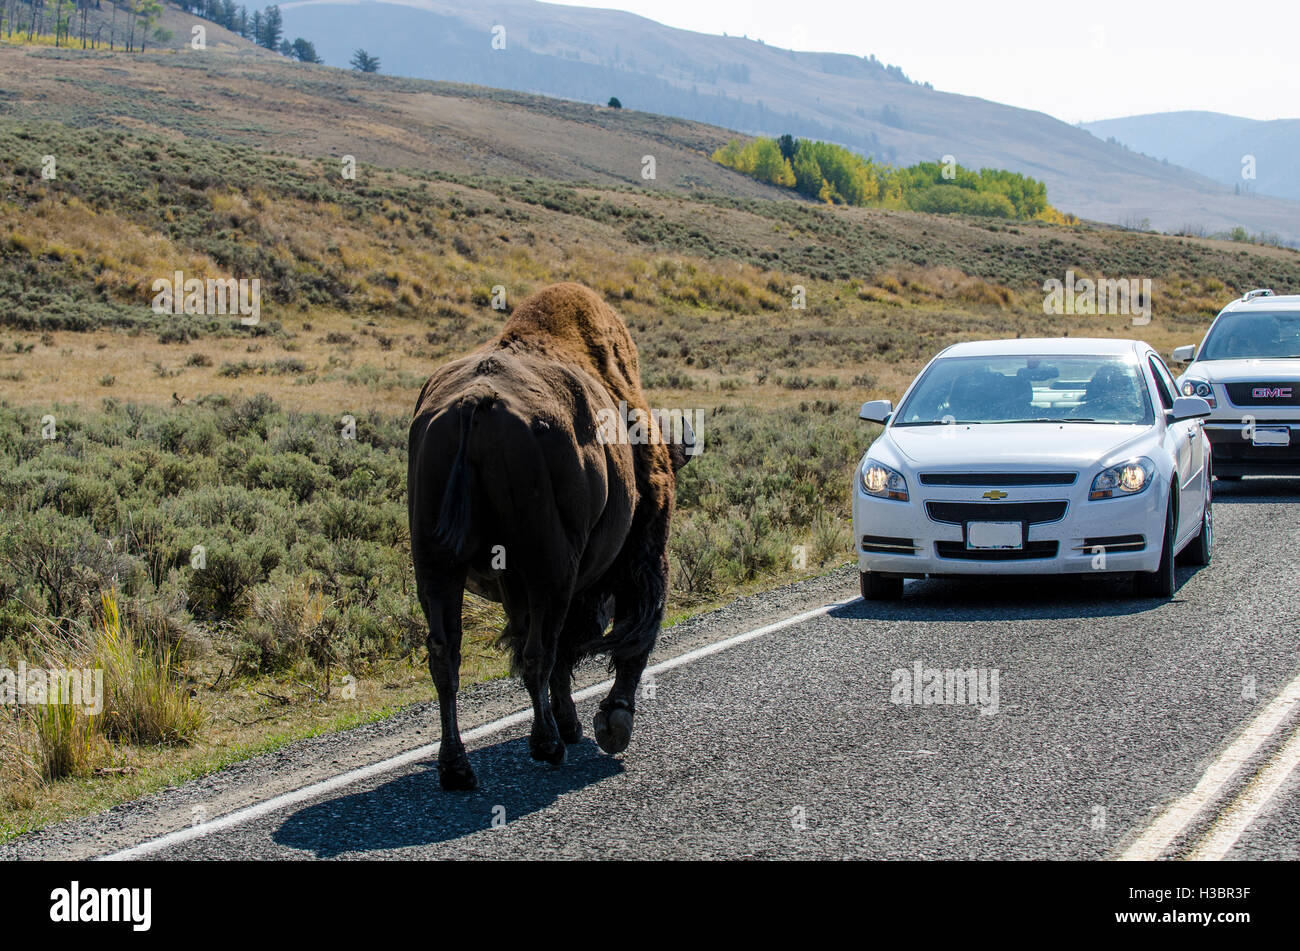 Bison buffalo (Bison bison) on highway with cars in Lamar Valley, Yellowstone National Park, Wyoming, USA. Stock Photo